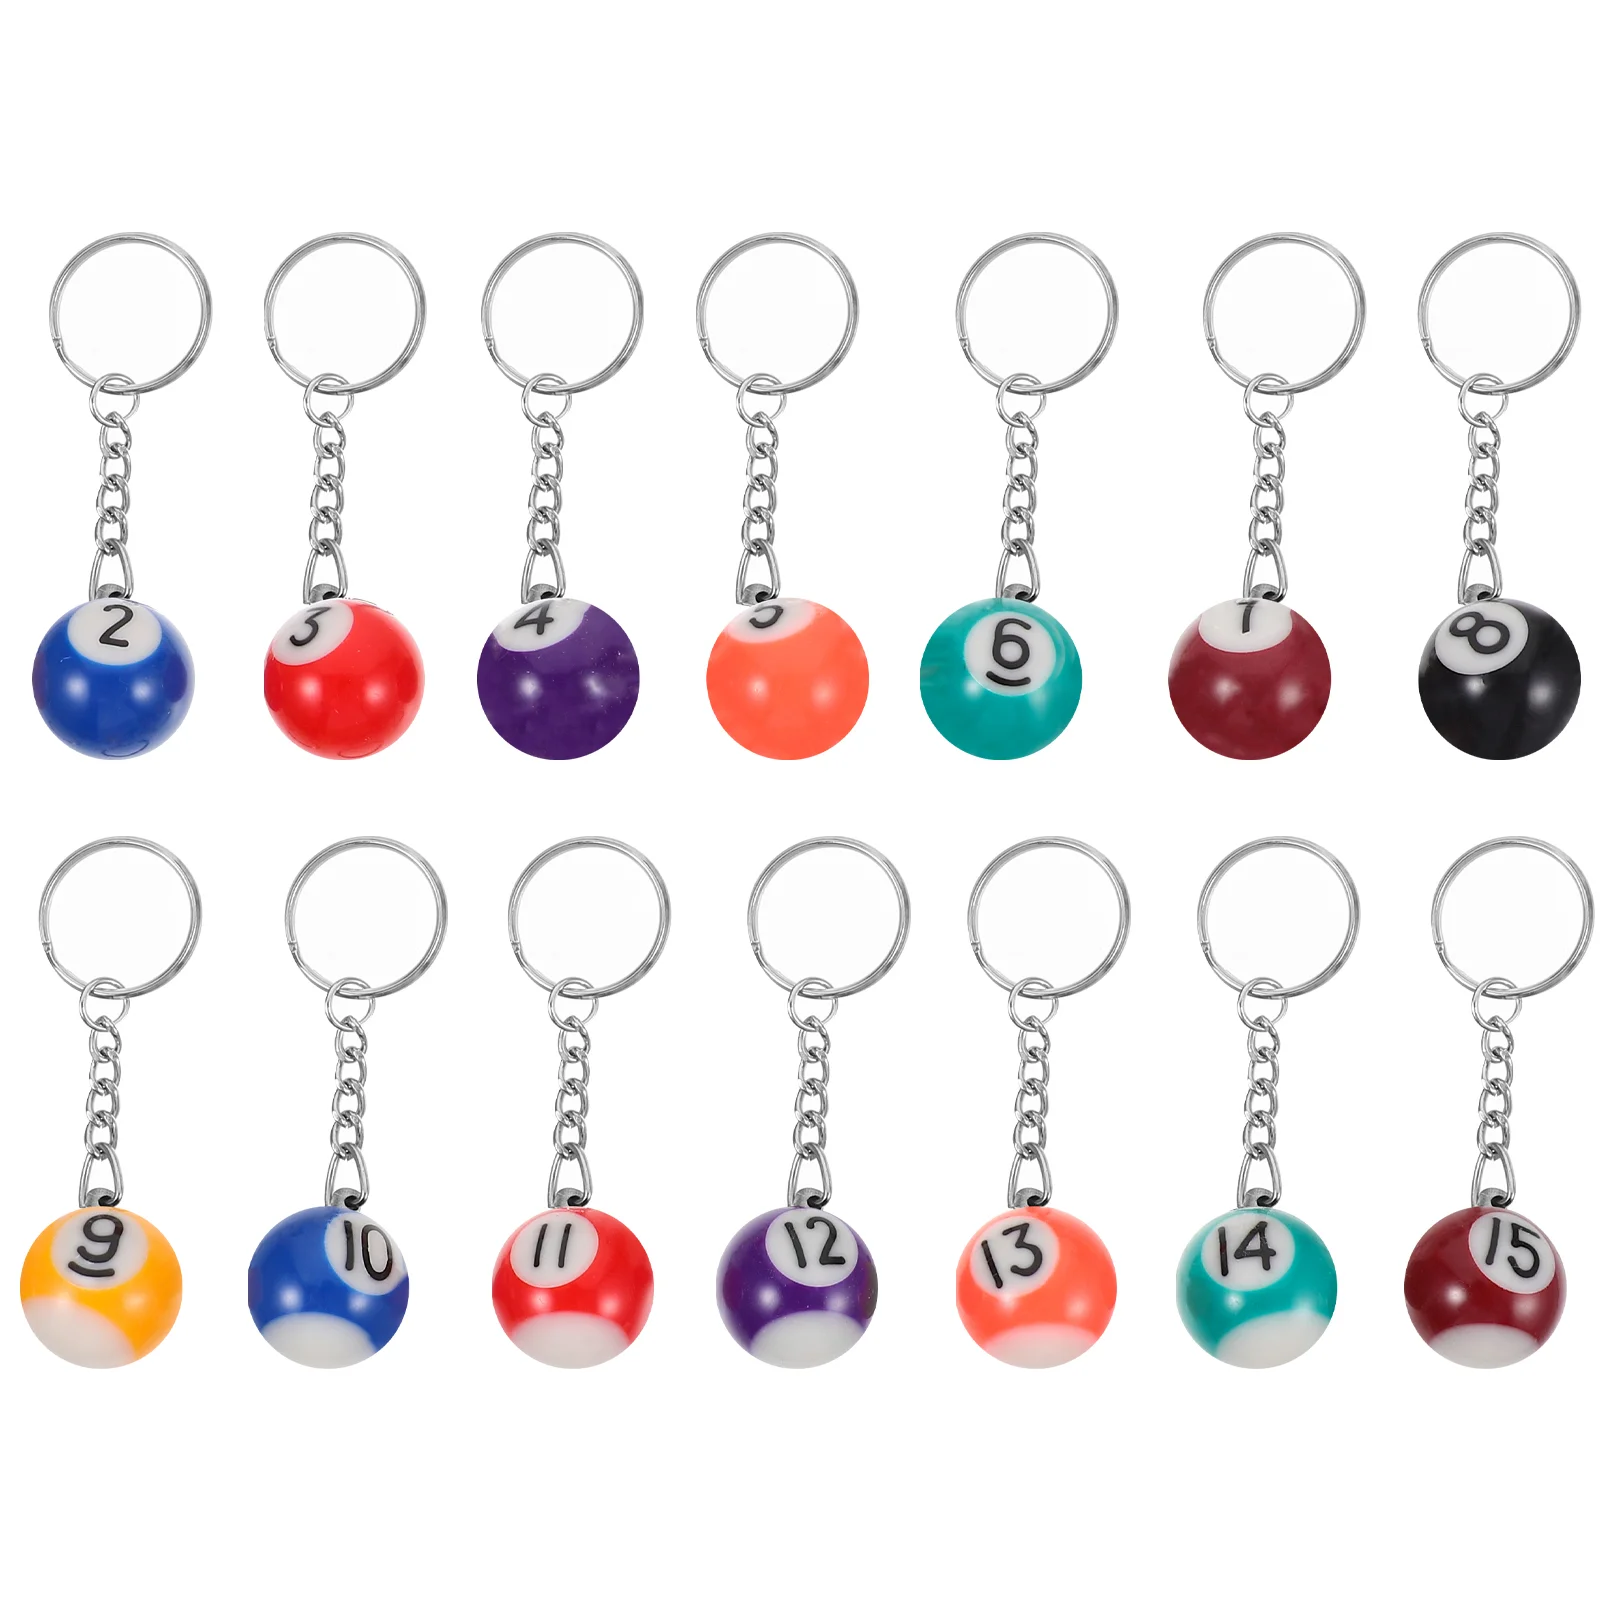 

Billiards Keychain Gifts Pool Accessories Bowling Pendant Sports Fan Key Chains Pool Player Match Keychains